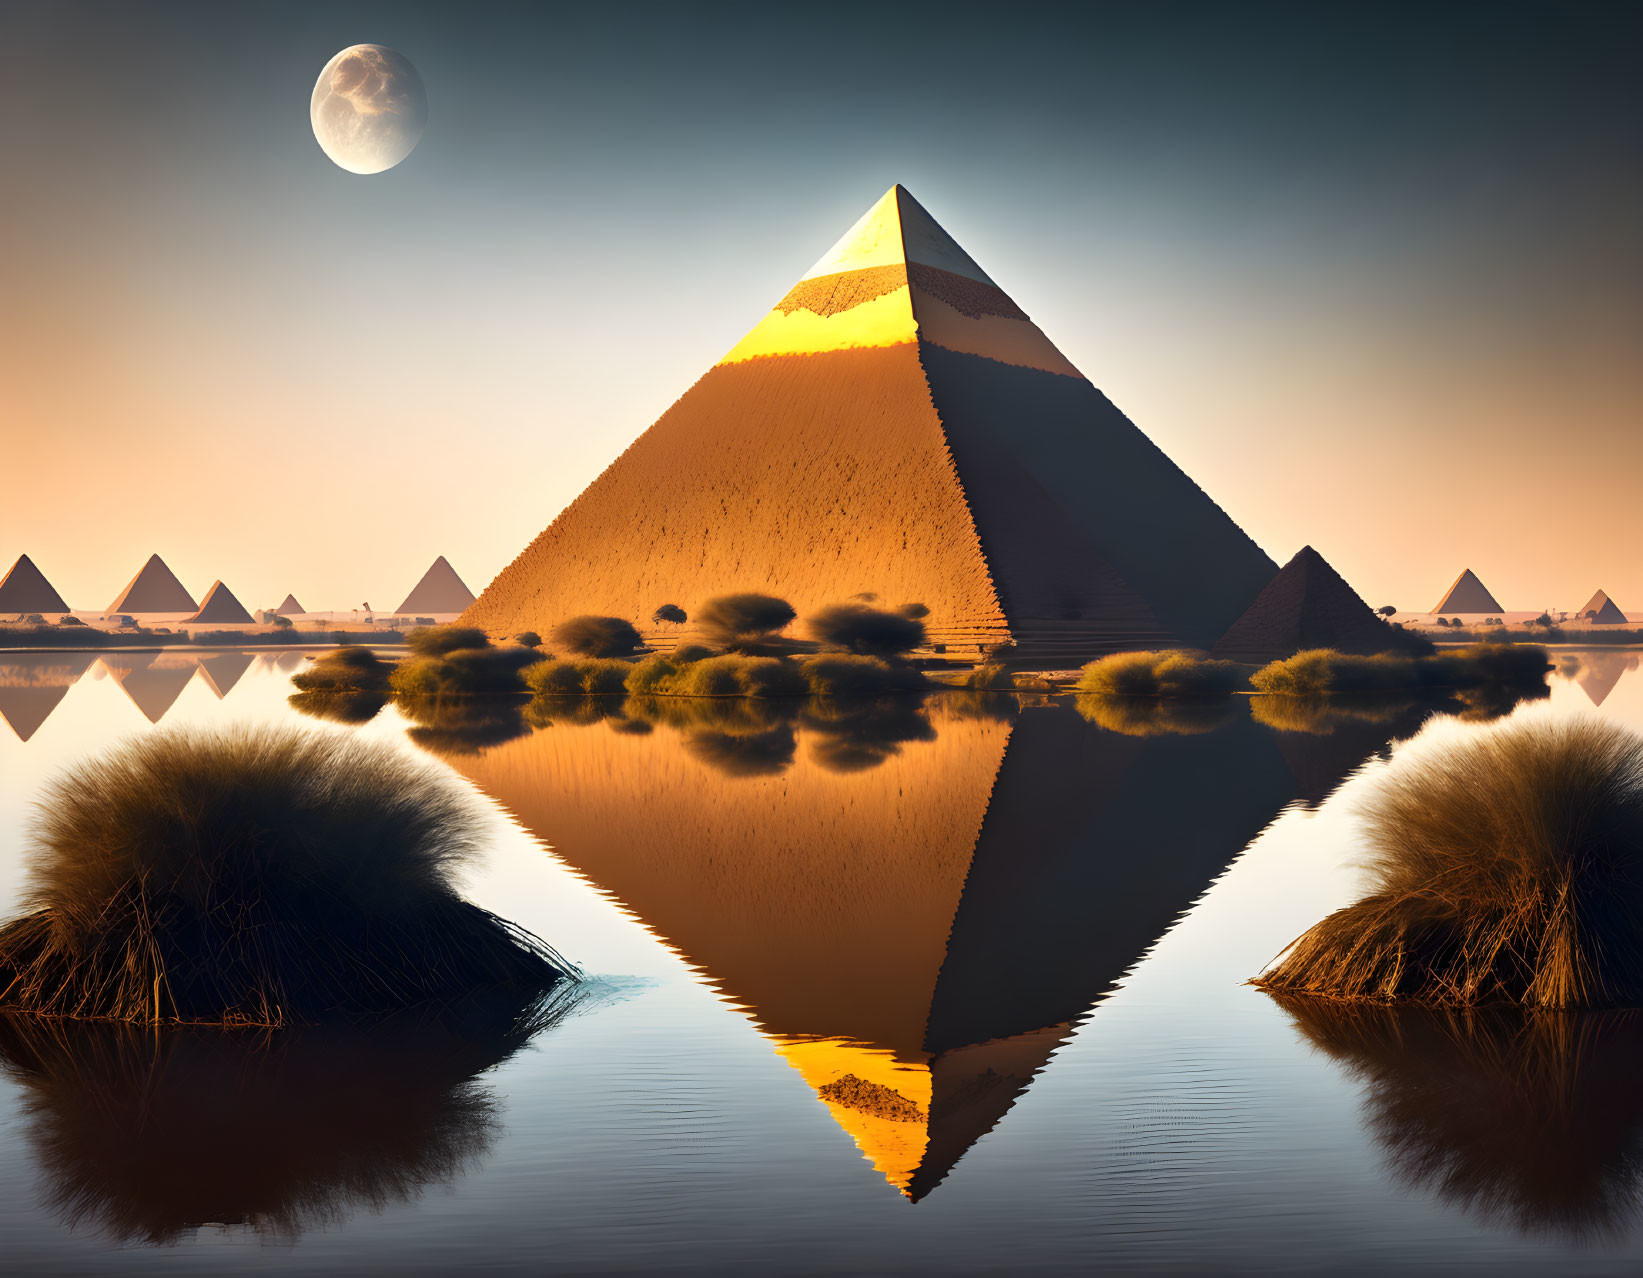 Sunset Pyramids Reflecting in Water with Dusky Sky and Moon